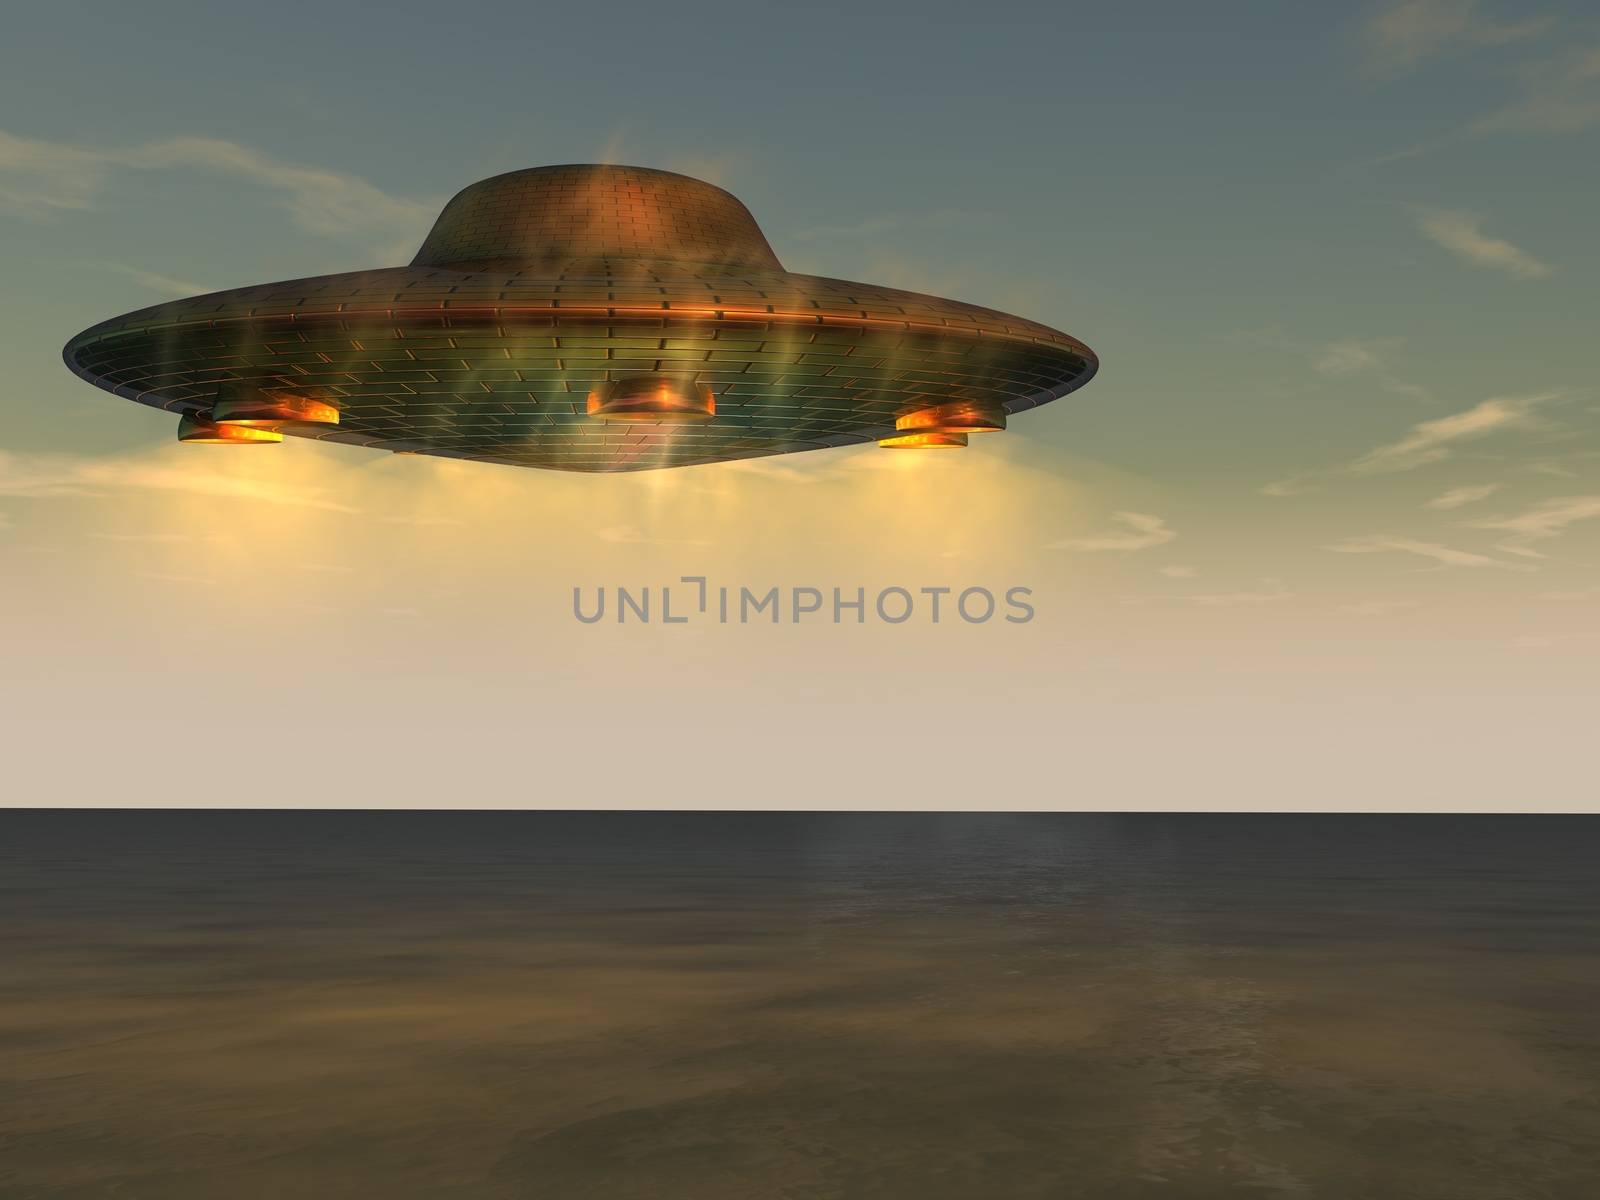 Computer generated 3D illustration of UFO - Unidentified Flying Object on the sky above the sea level. Theme of visit from space, future of technology, scifi. 